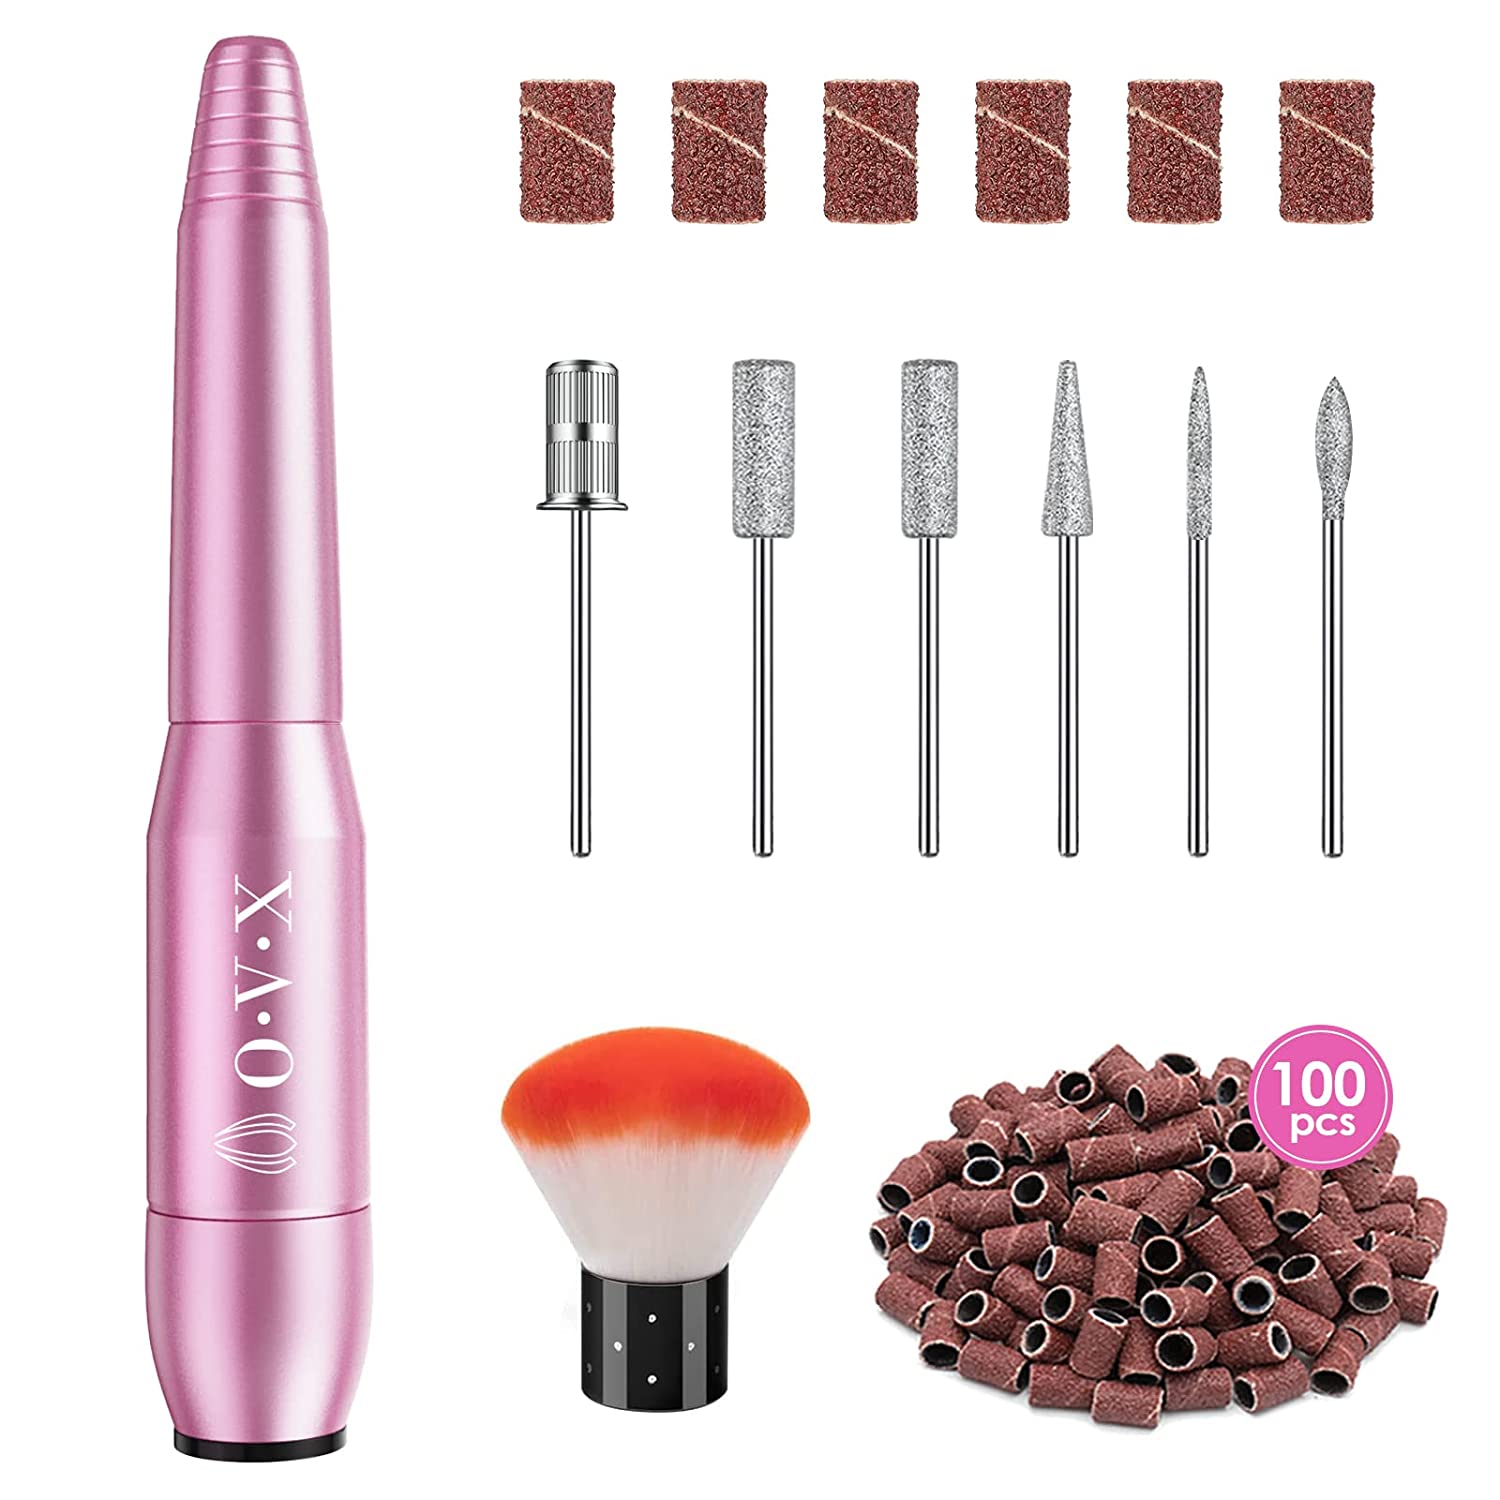 OVX 20000 RPM Aluminum Alloy Electric Nail Drill